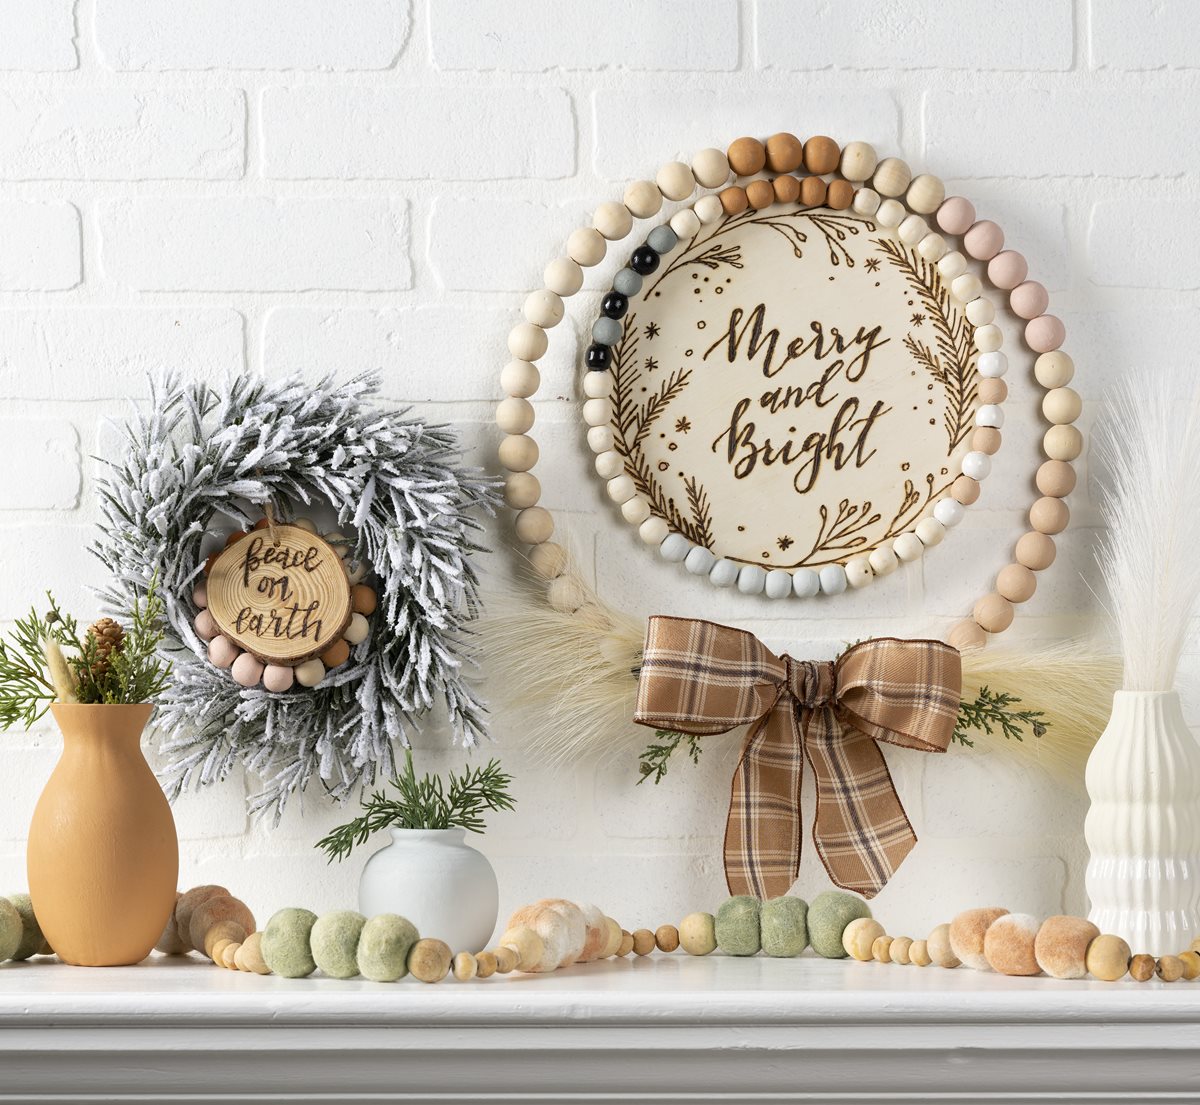 Wood Burned Wreaths and Tinted Garland